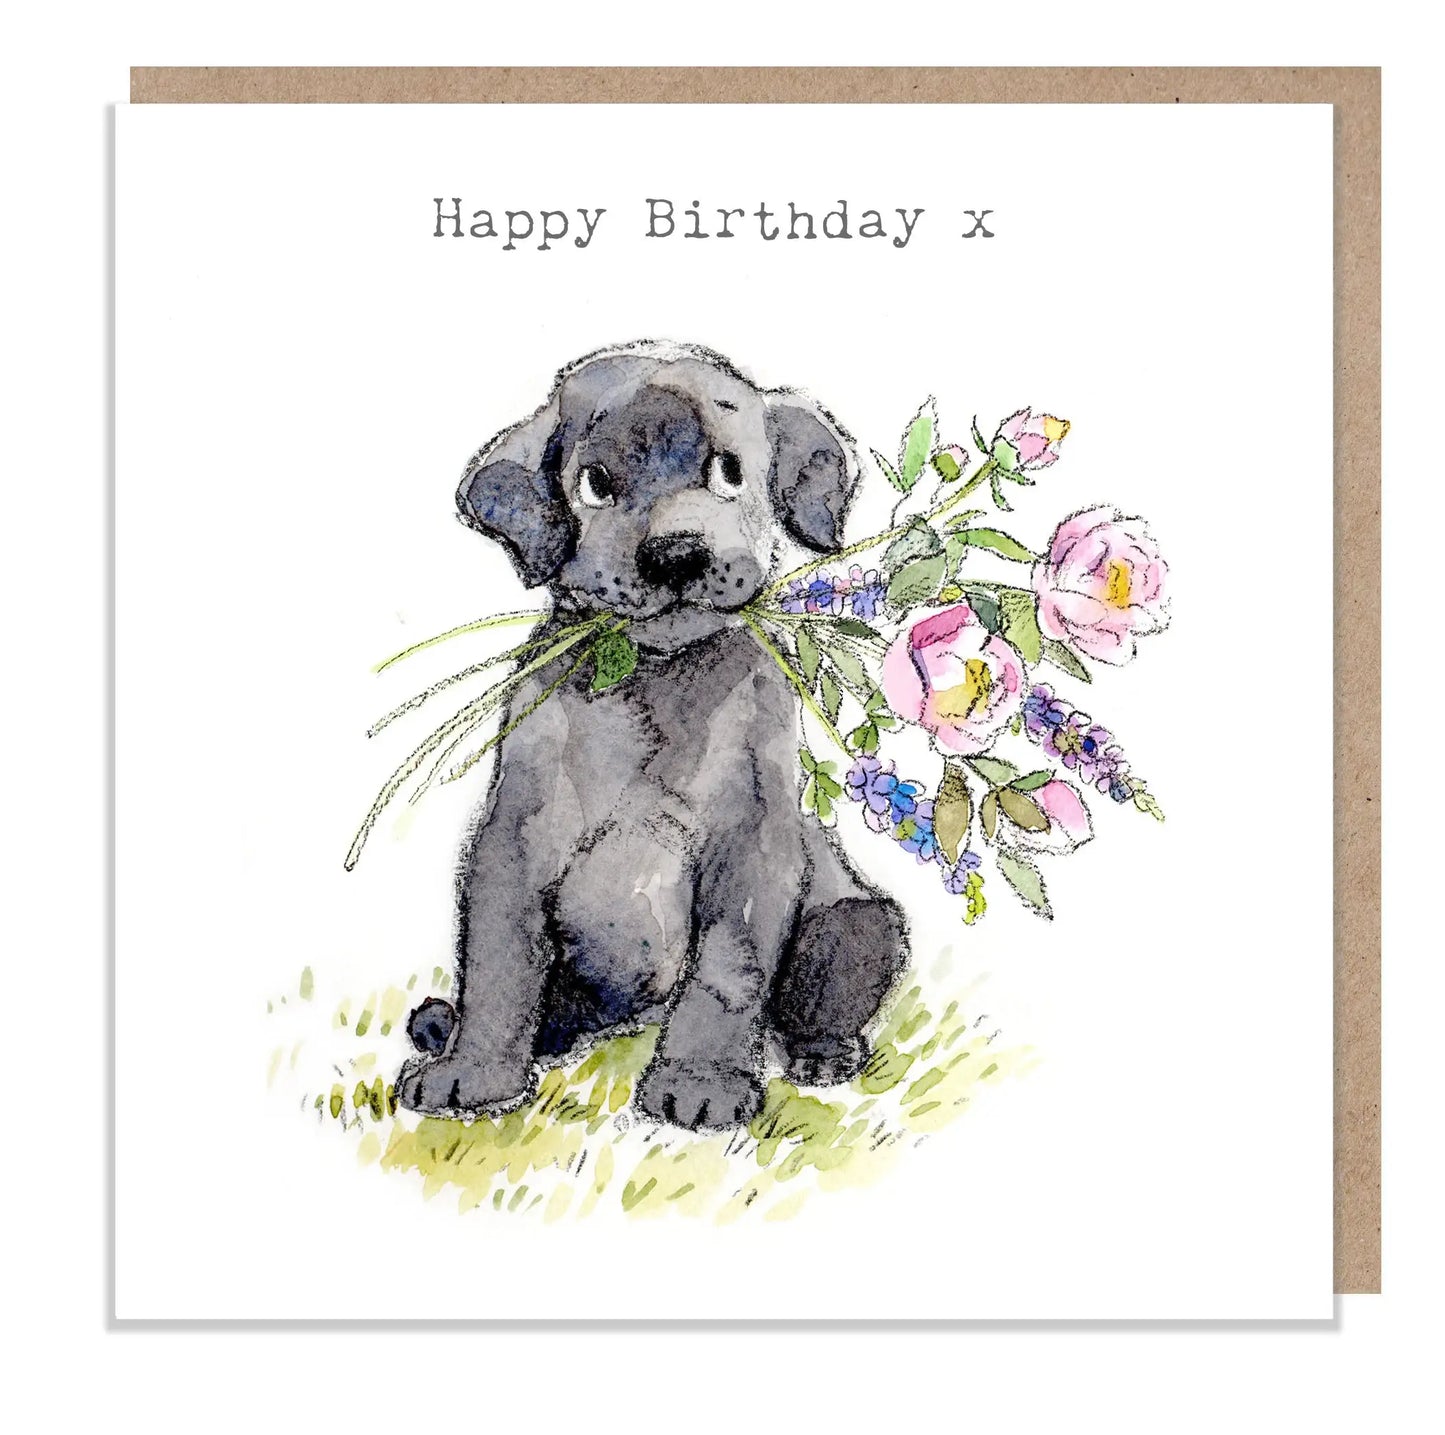 Paper Shed Design Ltd - Cute Dog Birthday Card - Black Labrador With Flowers